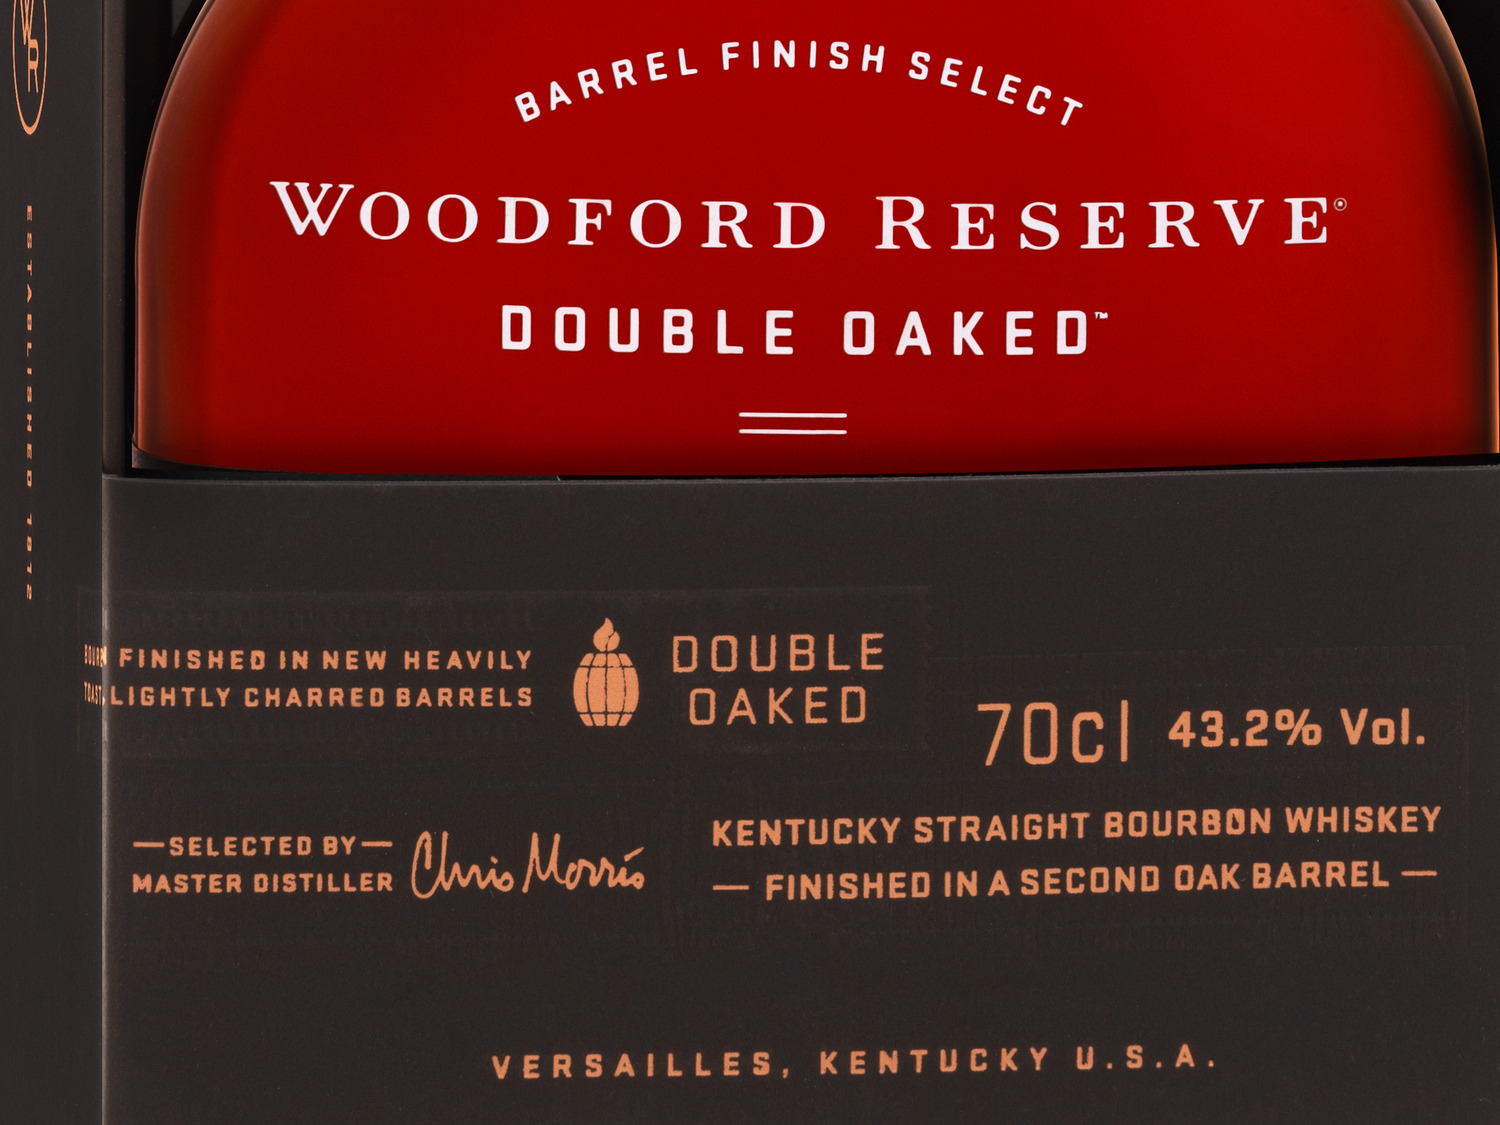 Woodford Reserve Double Oaked Kentucky Straight Bourbo…